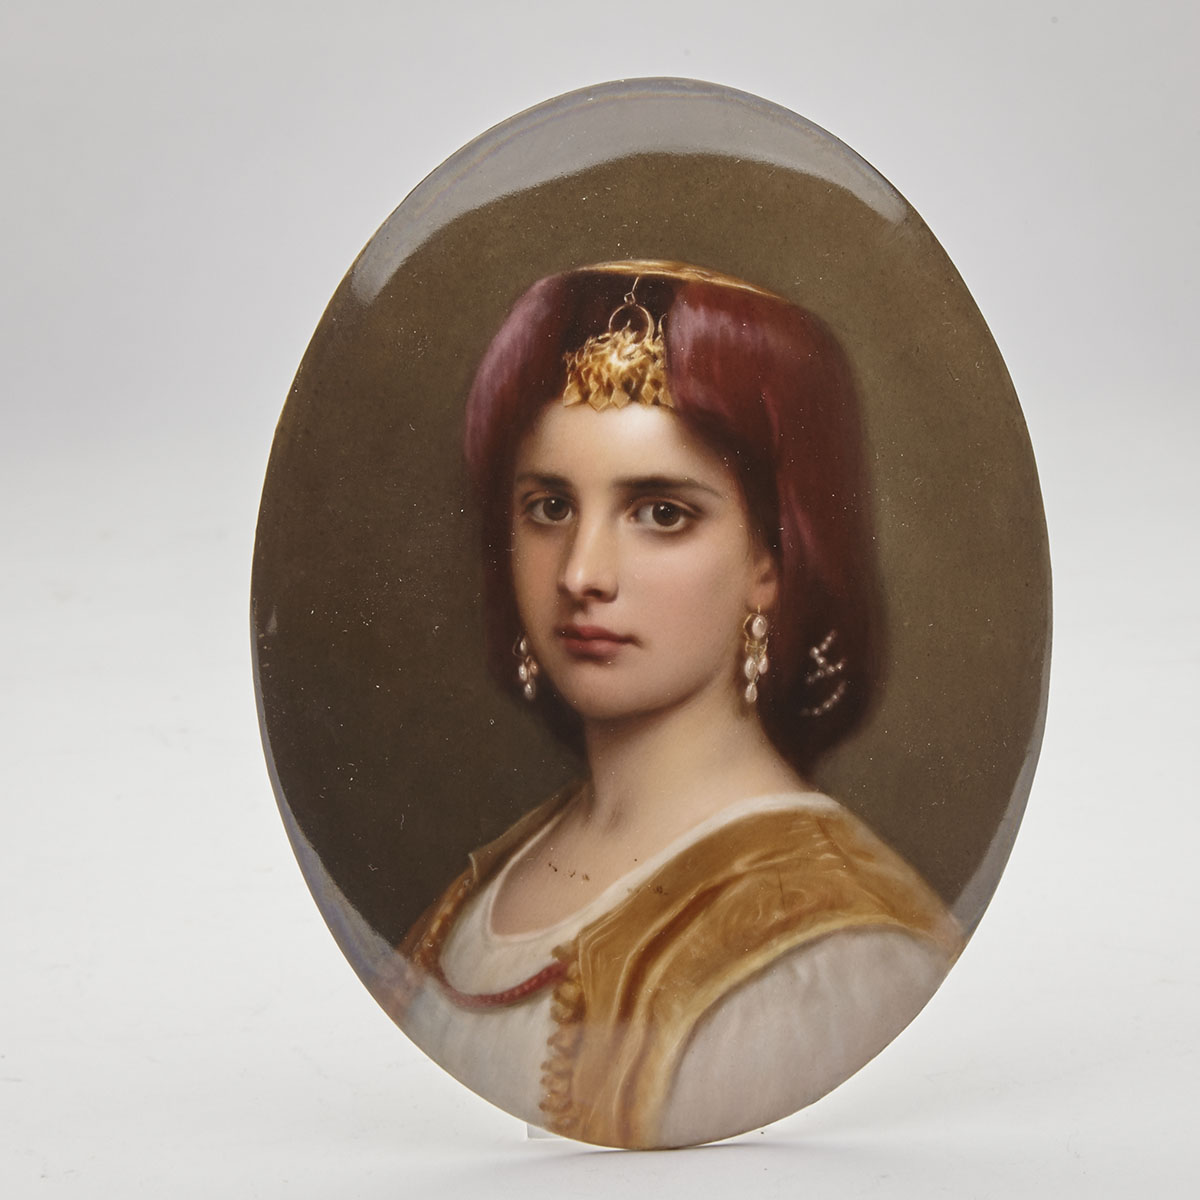 Berlin Oval Portrait Plaque of a Young Woman, late 19th century